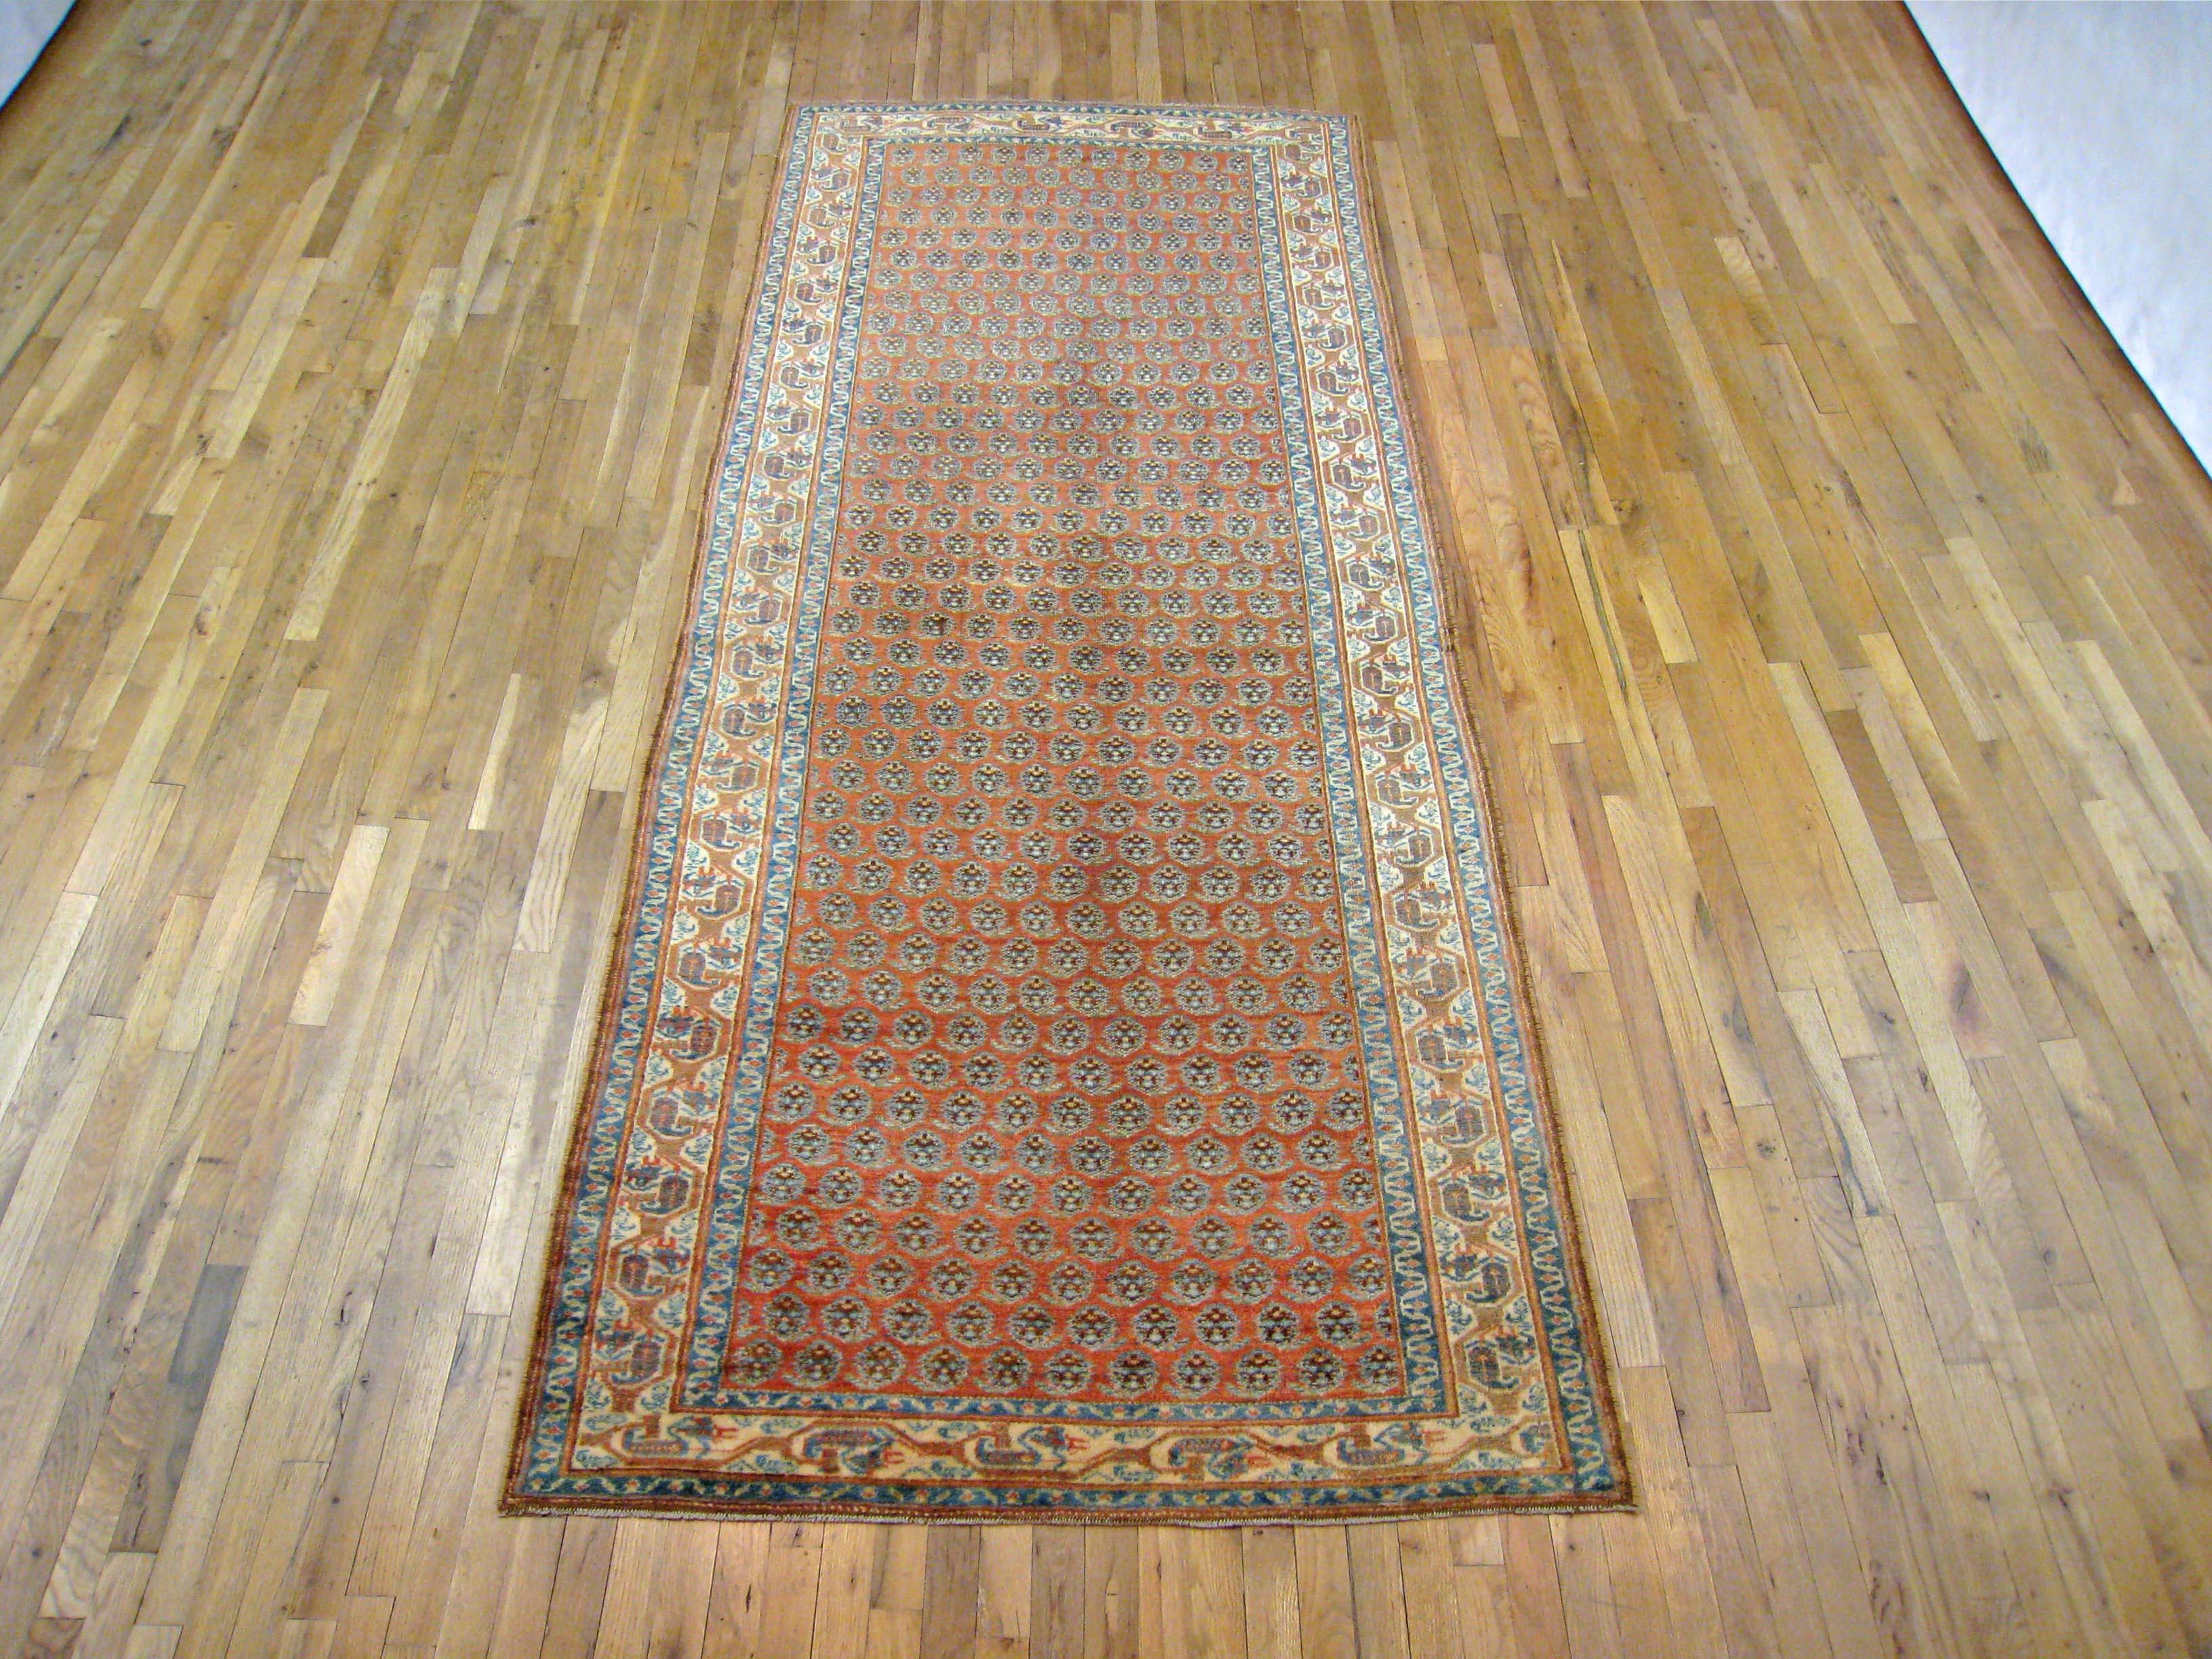 An antique Persian Saraband oriental rug in kaleghi (gallery) size, size 10'7 x 4'3, circa 1920. This lovely hand knotted carpet features a repeating small scale boteh (paisley) design in the soft red central field. The field is enclosed within a